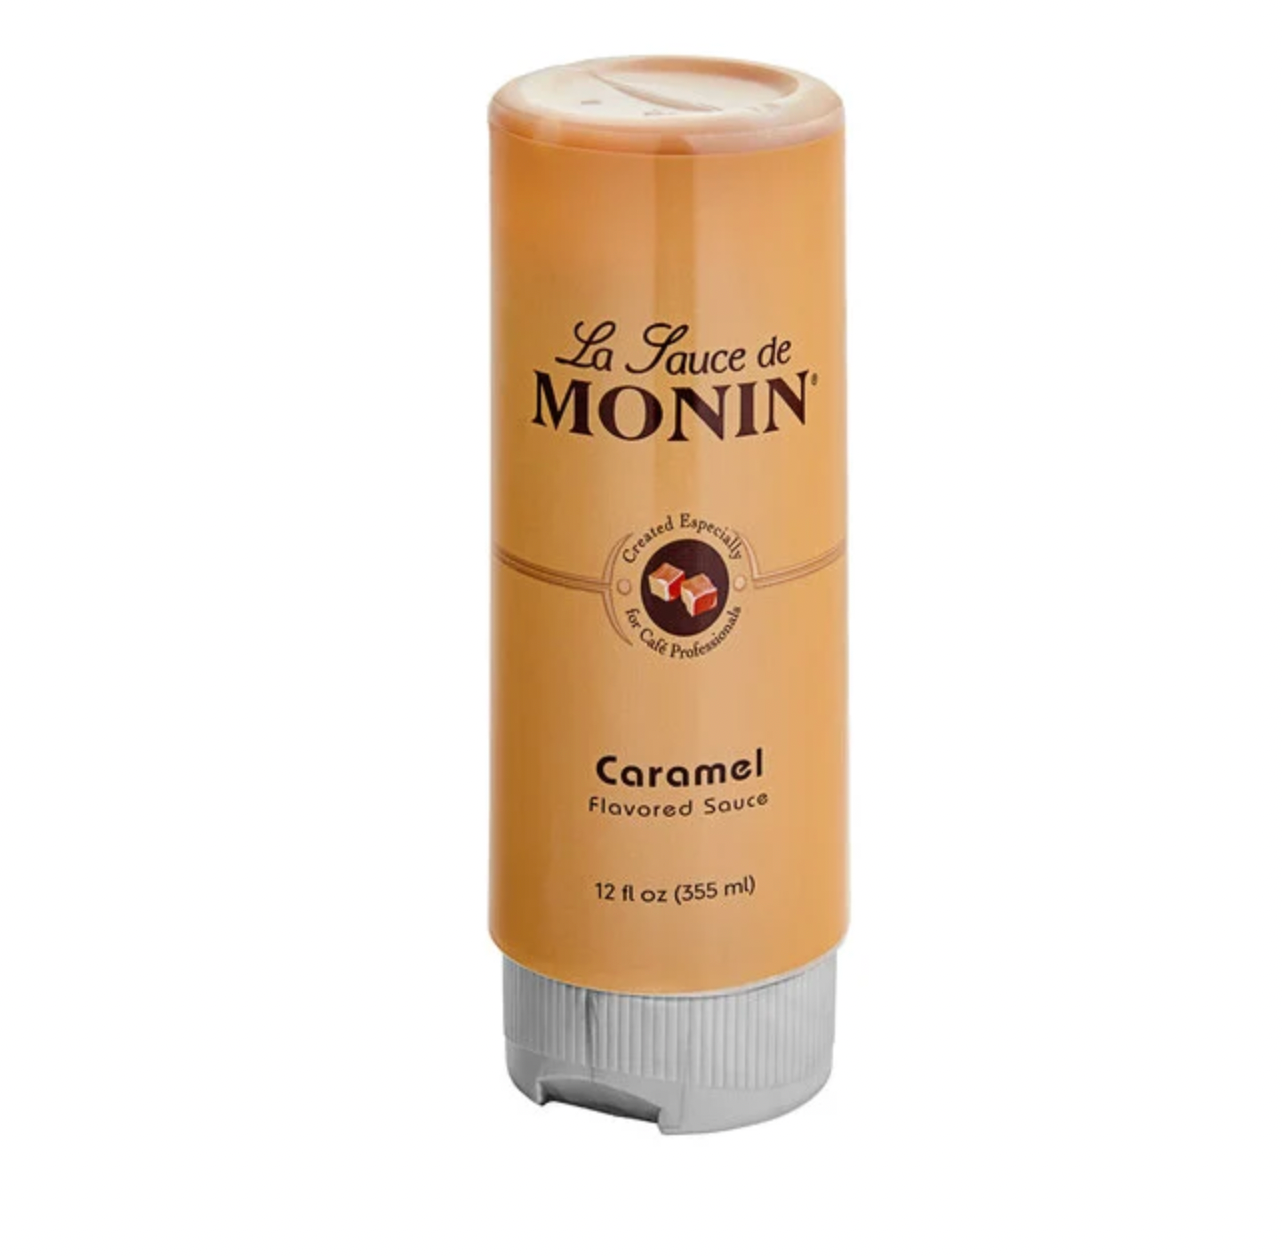 Monin Sauce (Pick Up In Store ONLY)